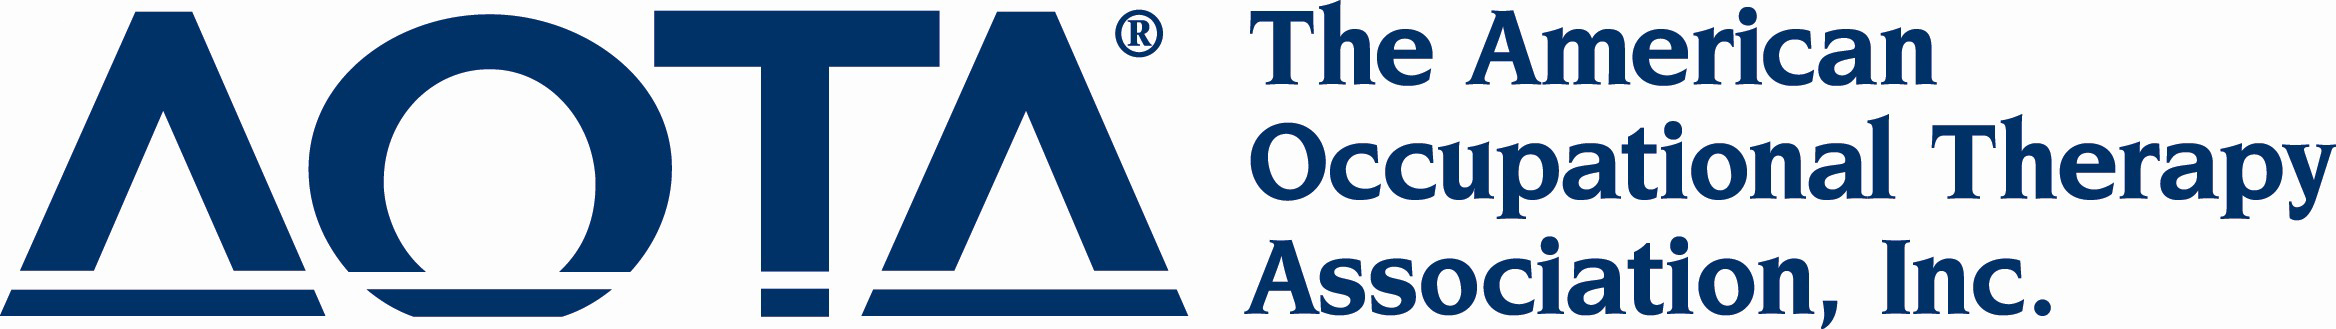 AOTA The American Occupational Therapy Association, Inc.